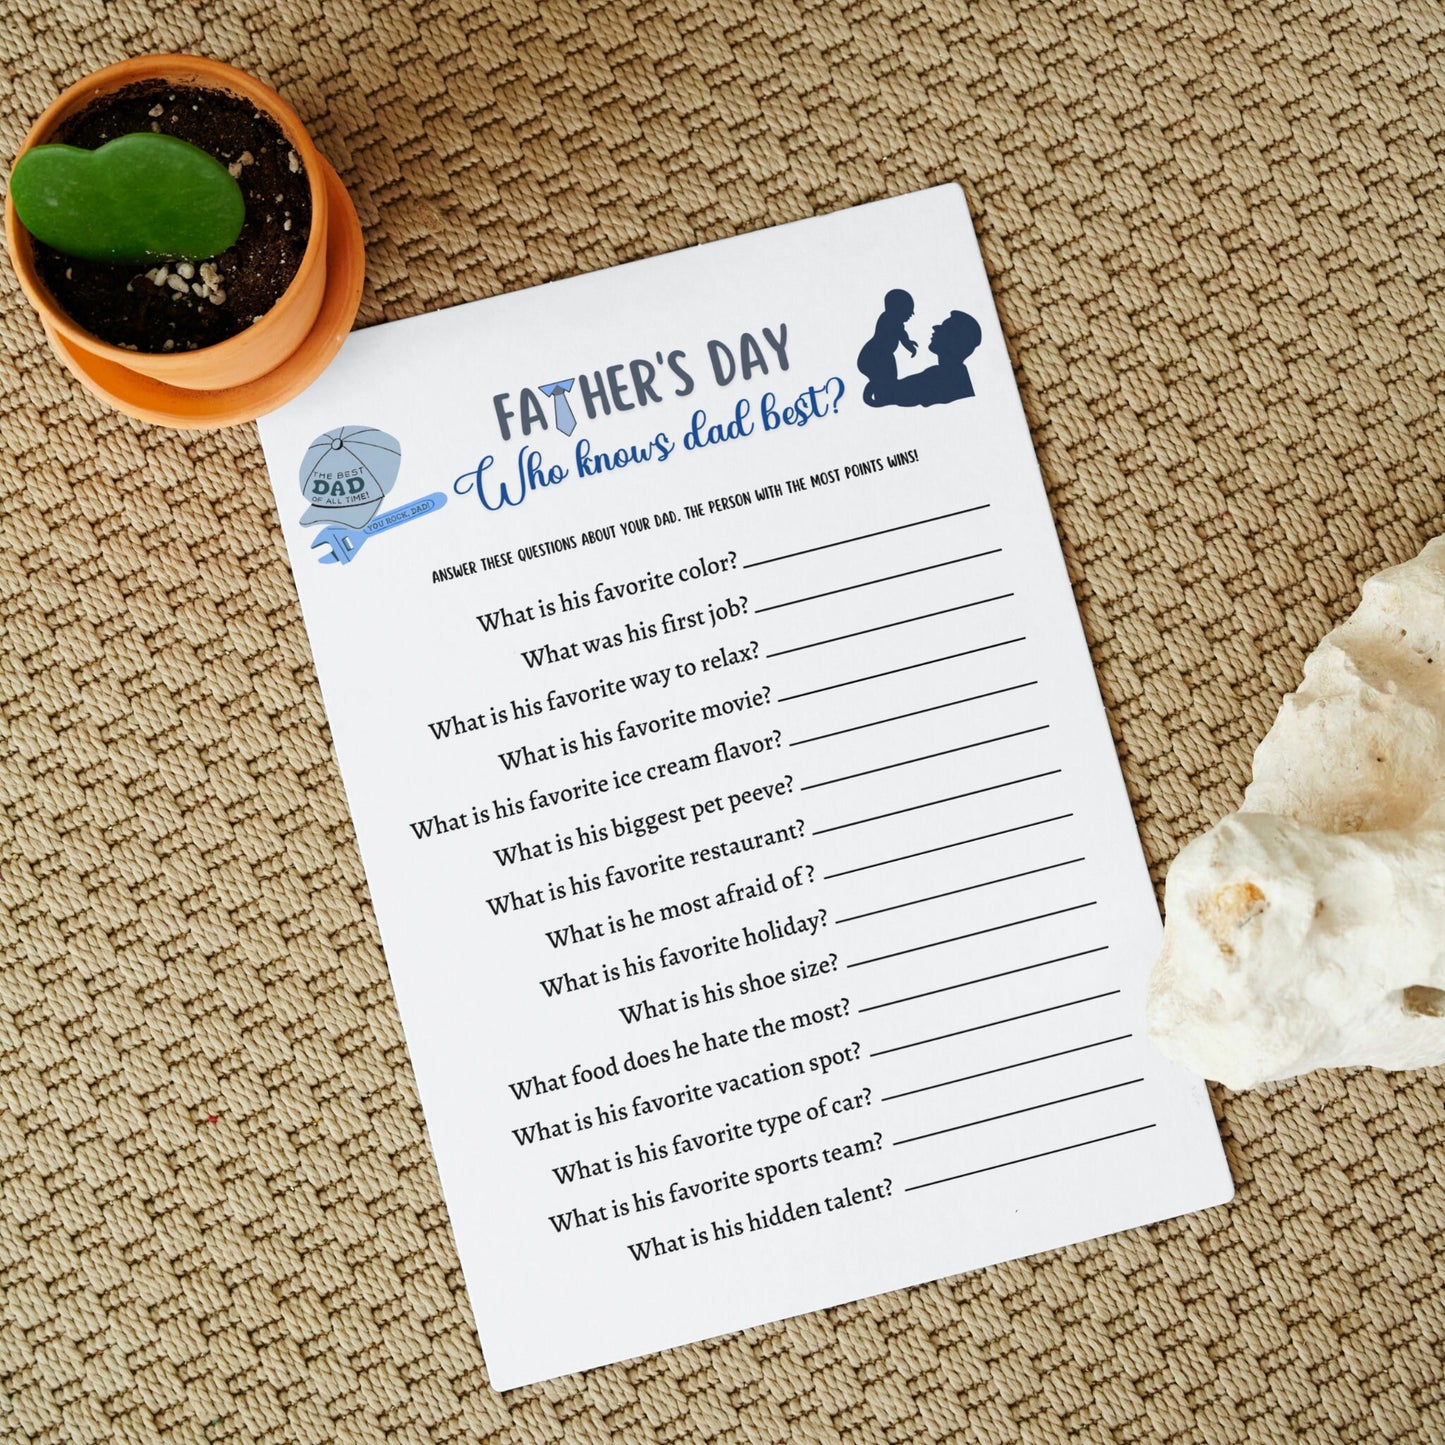 Father's Day Game Bundle Printable, Fathers Day Ideas, Fun Party Game, Activity Kids & Adults, Family Game, Classroom Game, Dad Jokes Trivia